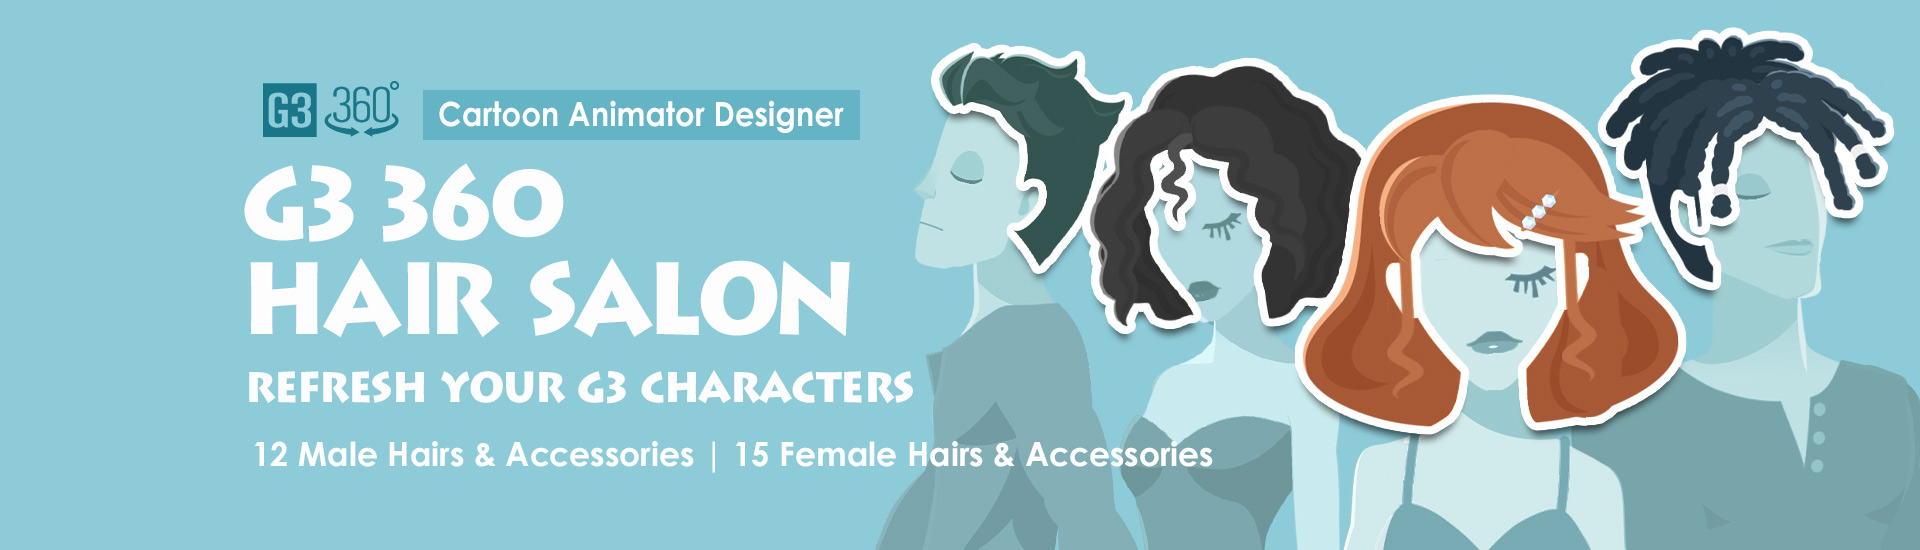 2d character - male and female hair